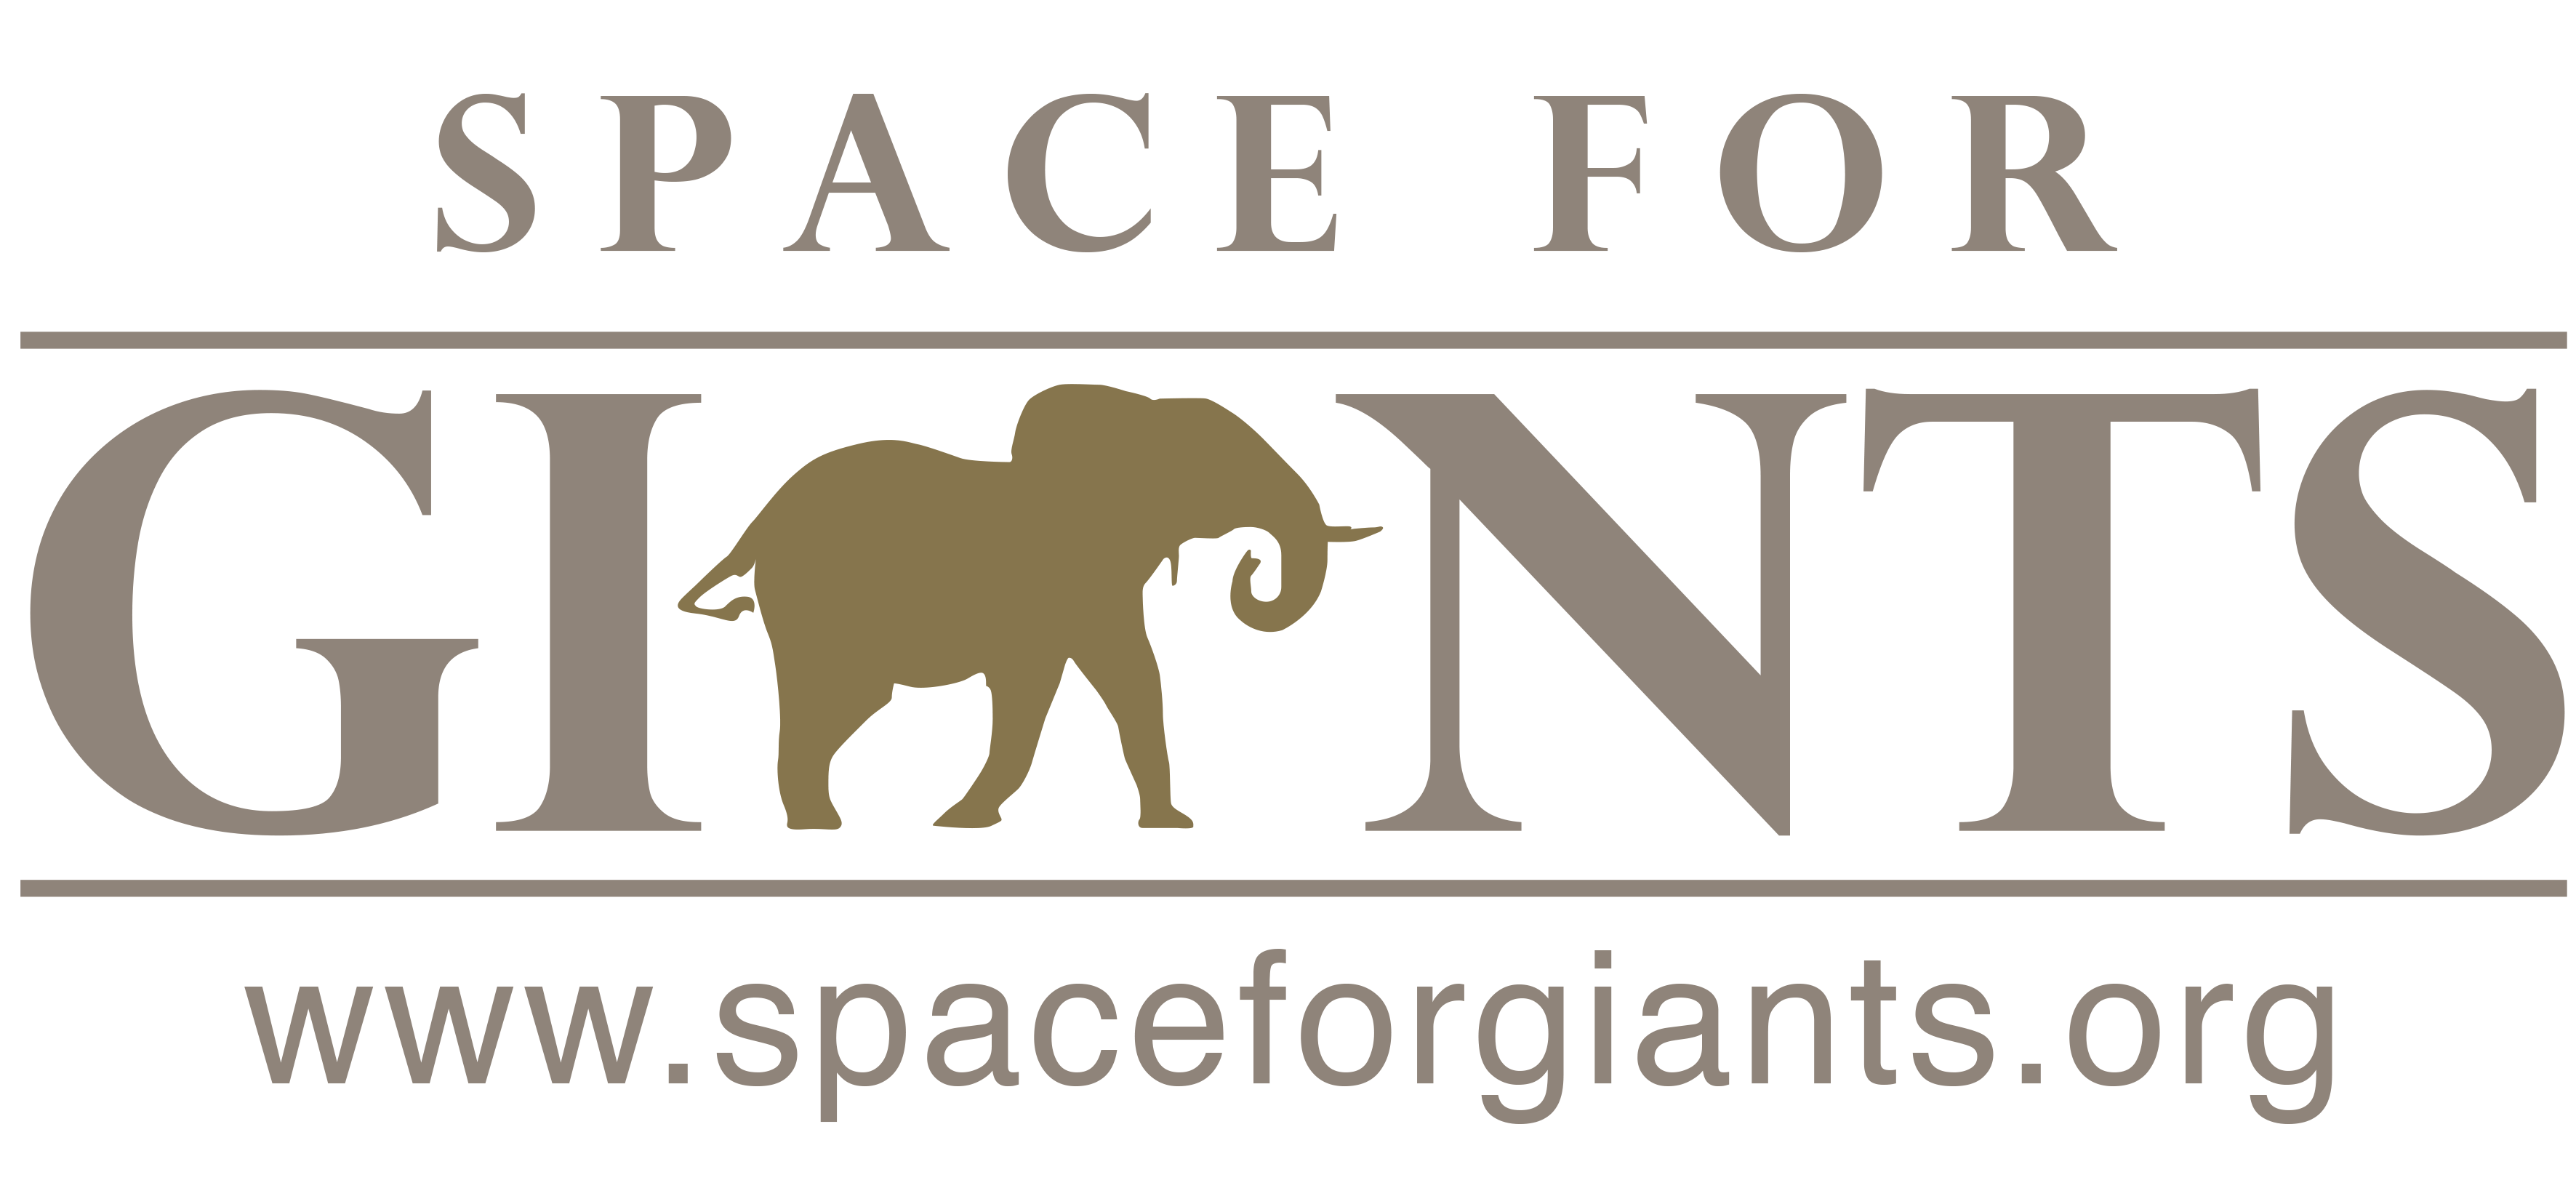 Space for Giants logo